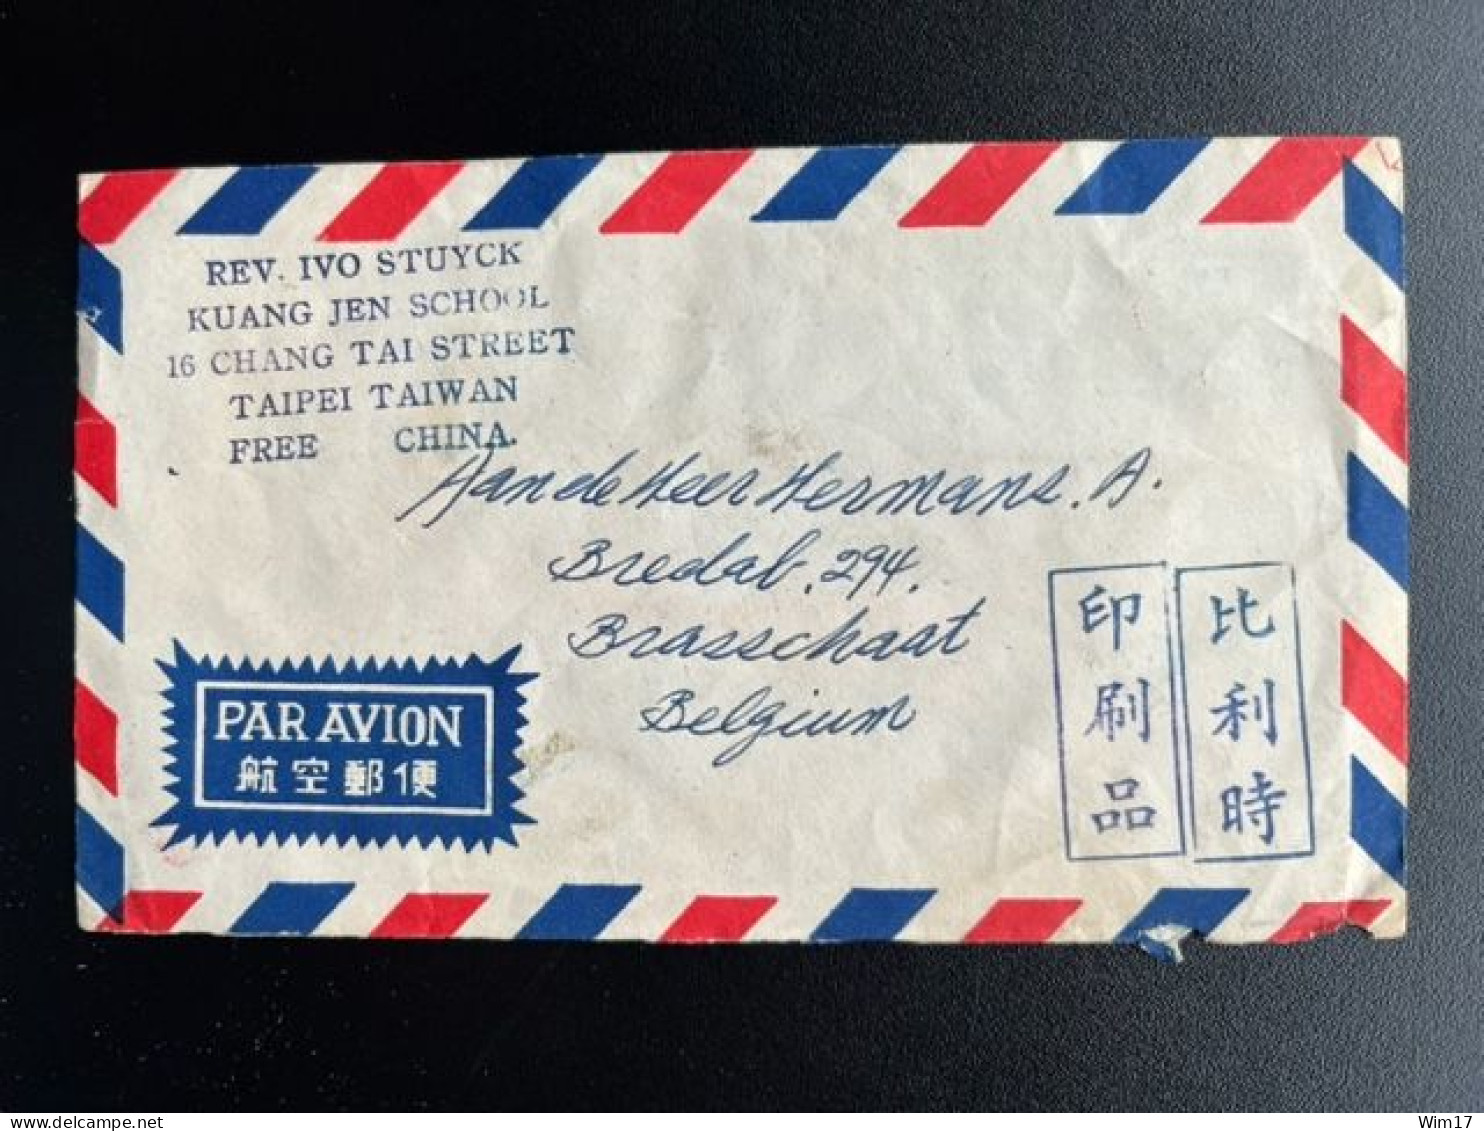 TAIWAN FORMOSA CHINA 1960 AIR MAIL LETTER TAIPEI TO BRASSCHAAT BELGIUM 26-10-1960 - Storia Postale